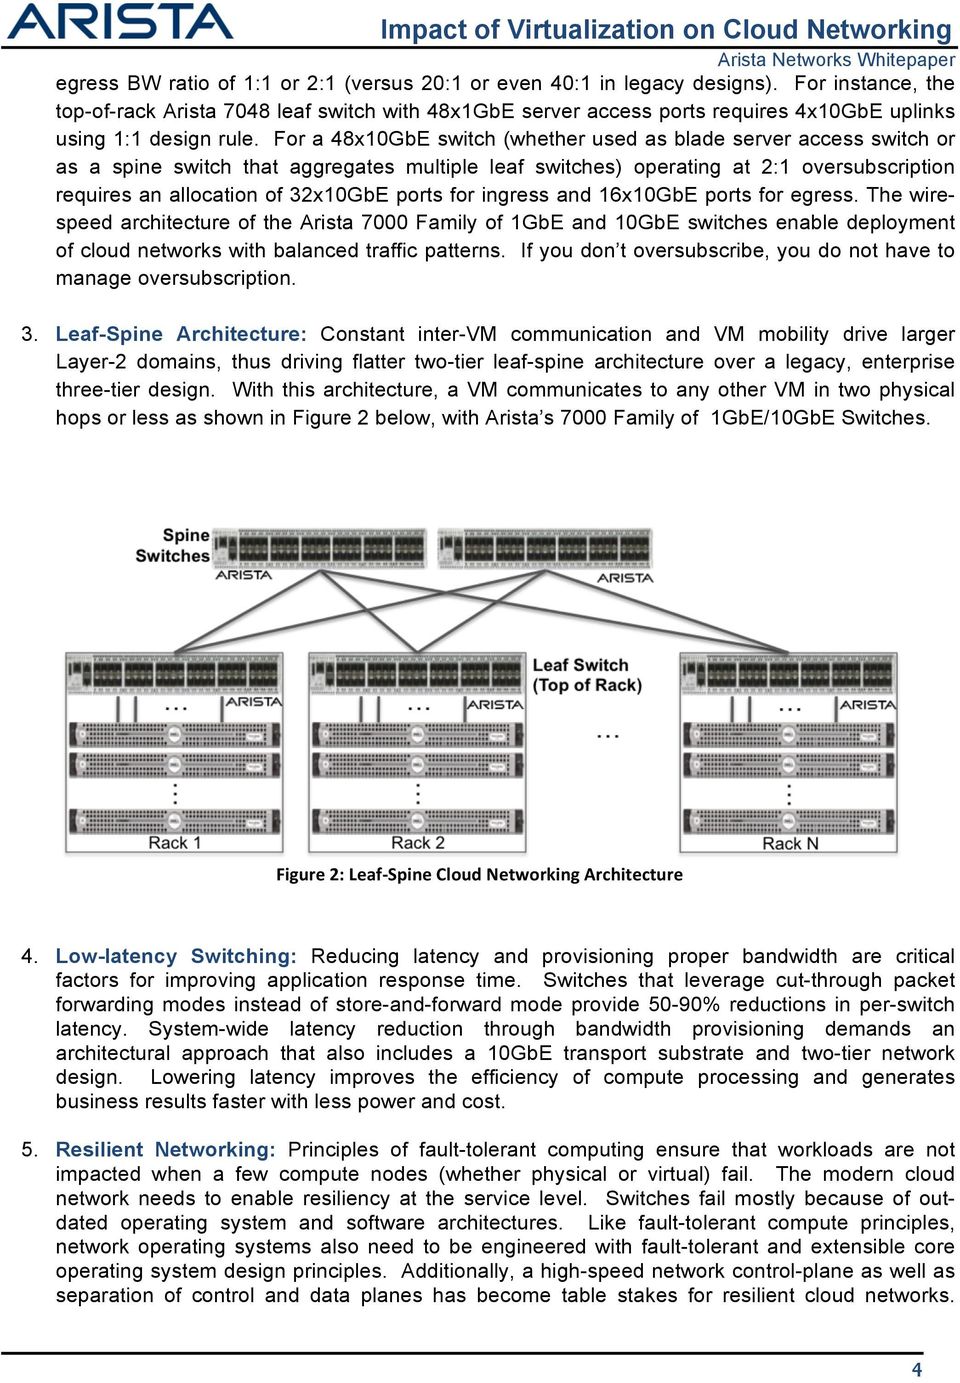 For a 48x10GbE switch (whether used as blade server access switch or as a spine switch that aggregates multiple leaf switches) operating at 2:1 oversubscription requires an allocation of 32x10GbE